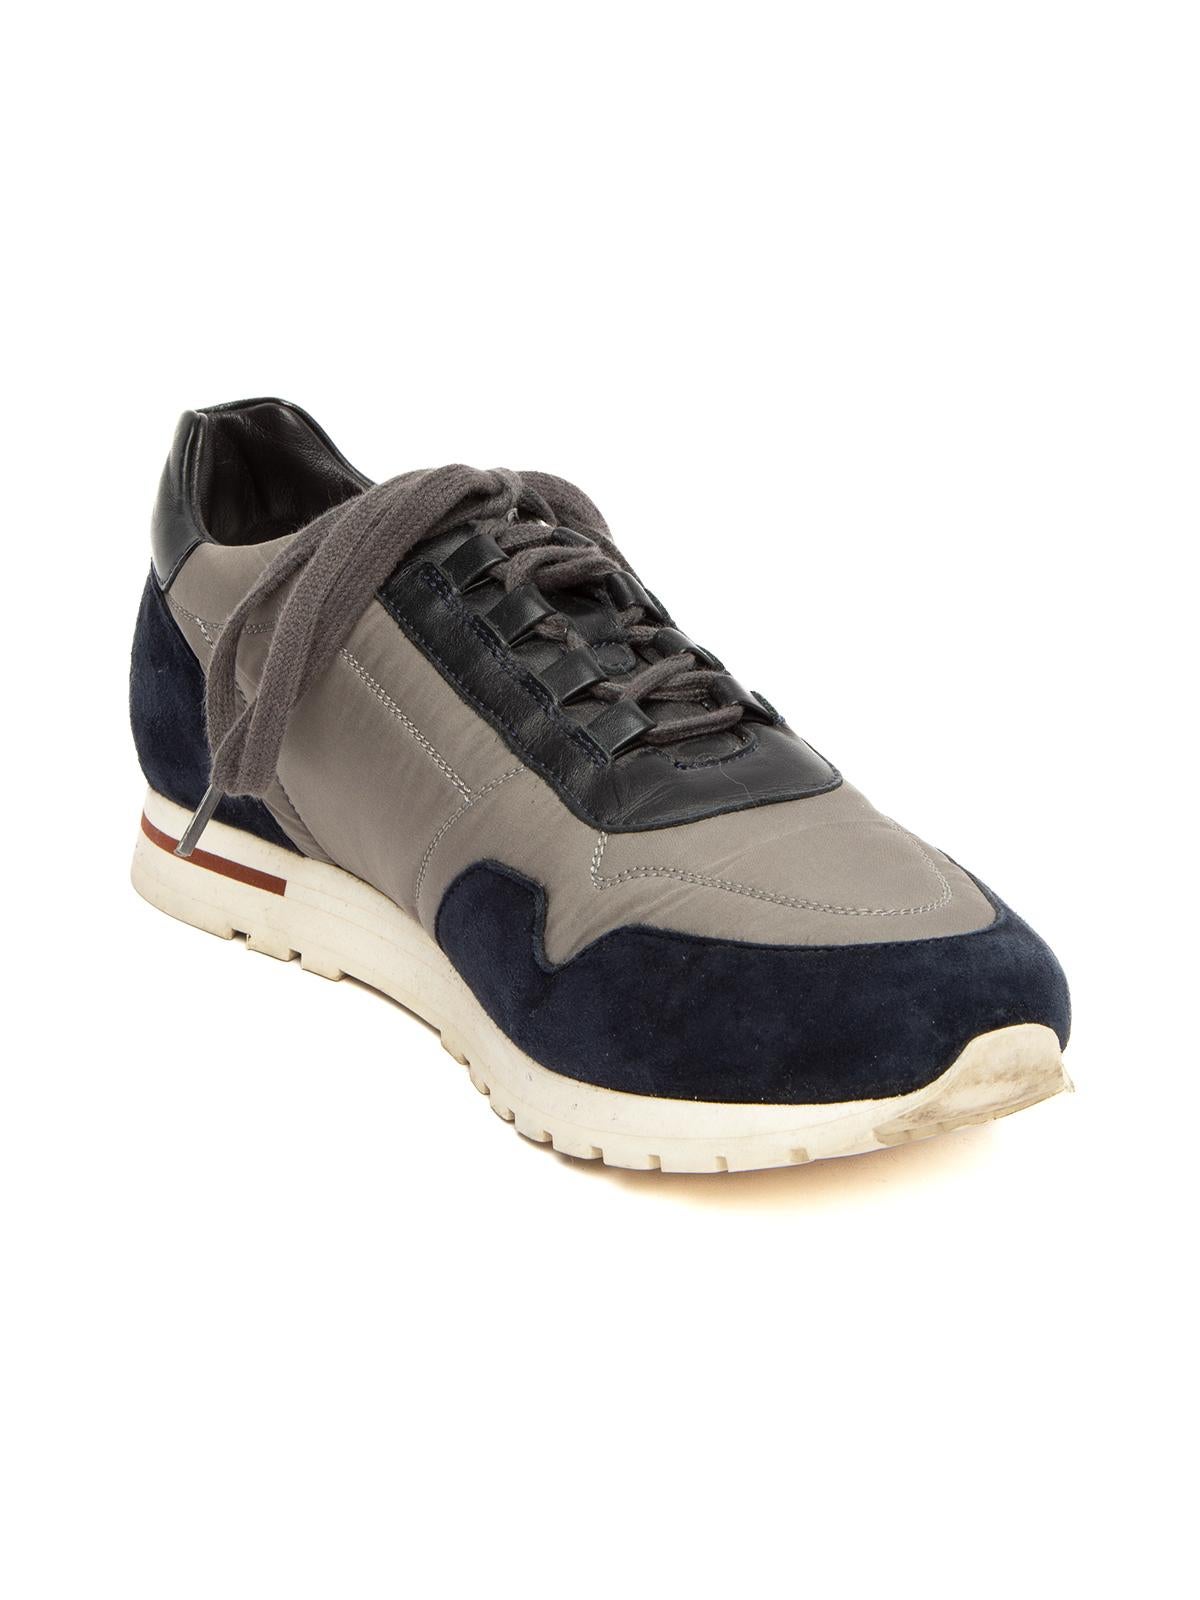 CONDITION is Good. Some wear to sneakers is evident. General signs of wear to outer fabrics/materials on this used Loro Piana designer resale item. Details Colour - Multi (Grey/blue/black) Material - Nylon/Suede/Leather Toe style- round toe Lace